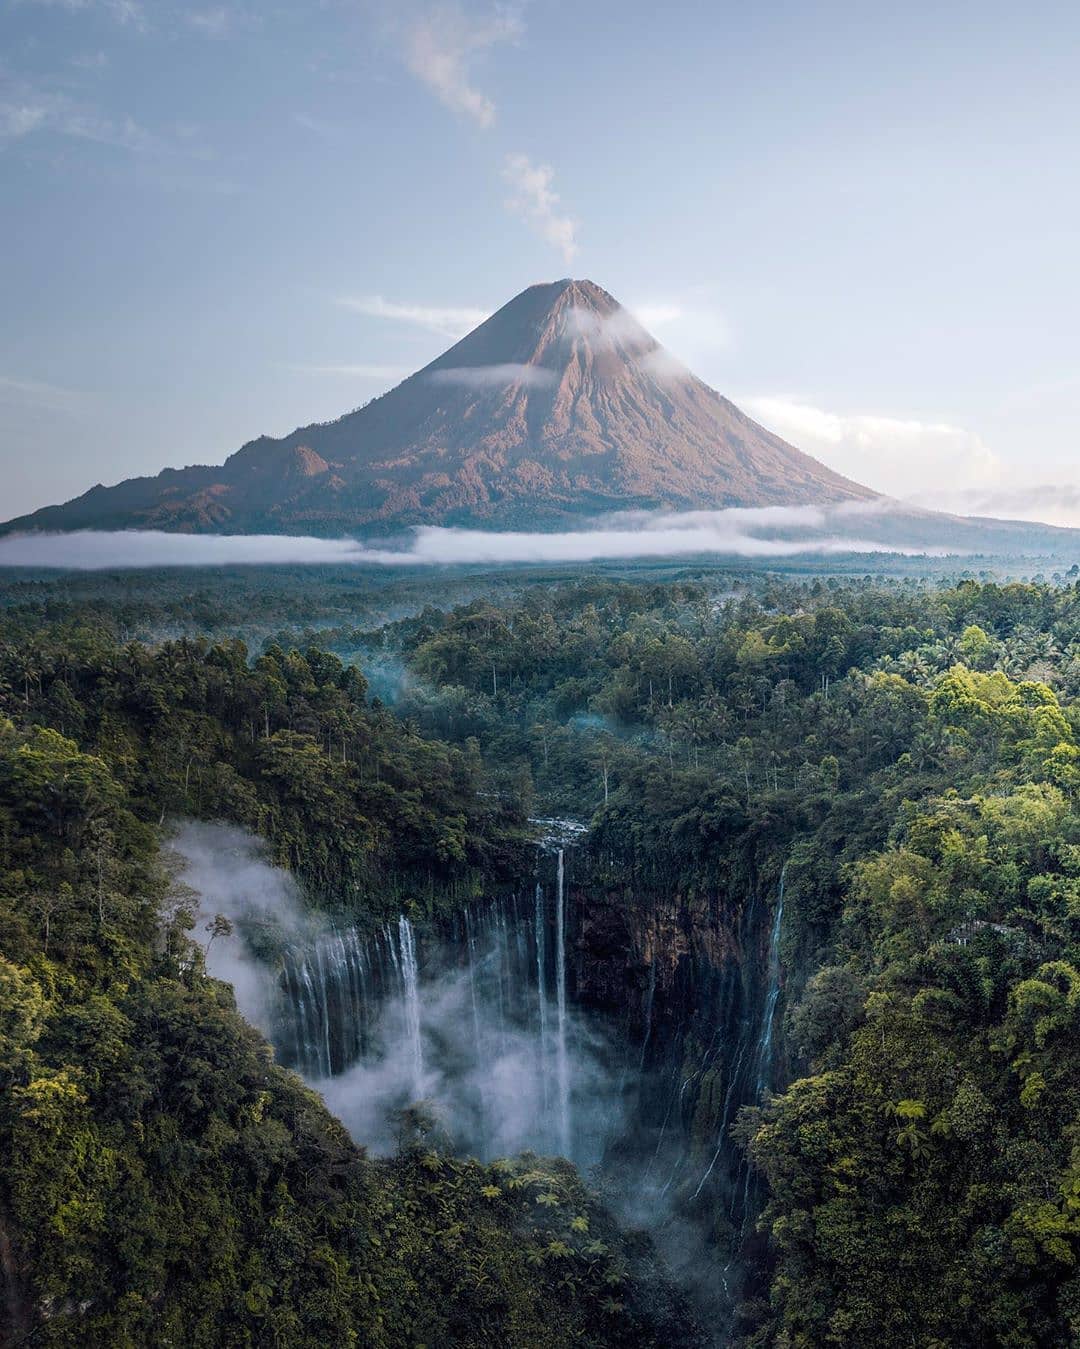 Mount Semuru in East Java, Indonesia is considered to be the "abode of gods." Perhaps it's because it is the tallest mountain on the Java island!